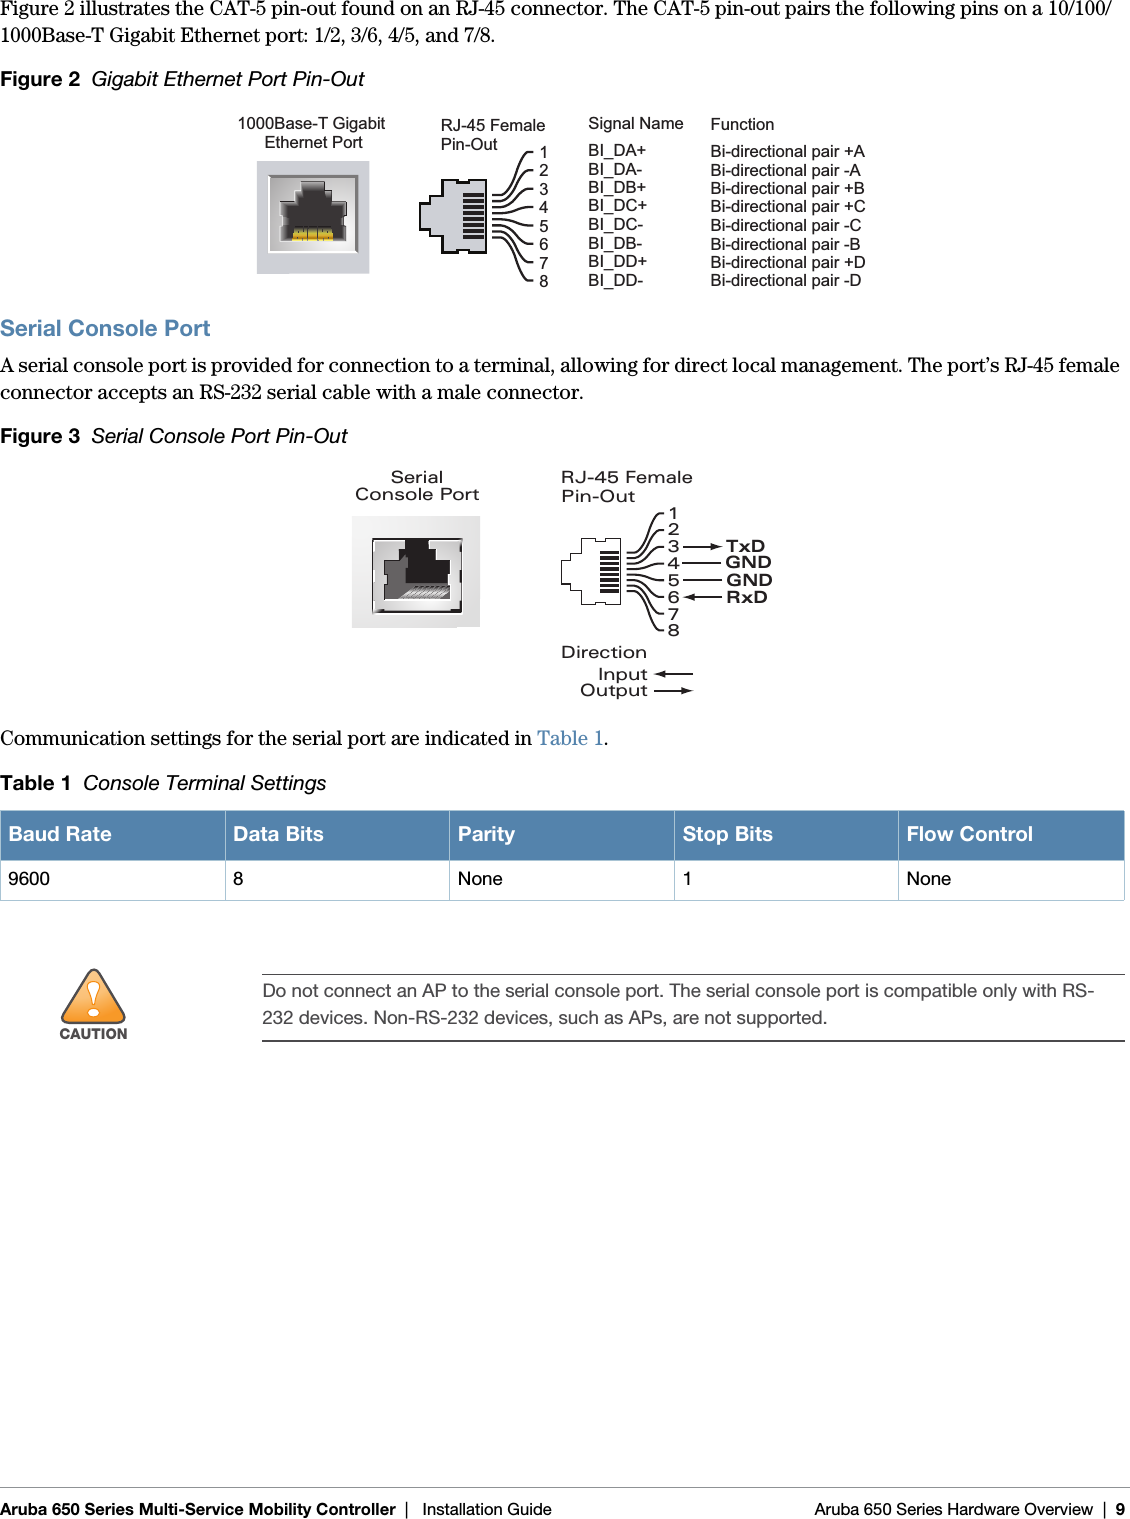 Aruba 650 Series Multi-Service Mobility Controller | Installation Guide Aruba 650 Series Hardware Overview | 9Figure 2 illustrates the CAT-5 pin-out found on an RJ-45 connector. The CAT-5 pin-out pairs the following pins on a 10/100/1000Base-T Gigabit Ethernet port: 1/2, 3/6, 4/5, and 7/8.Figure 2  Gigabit Ethernet Port Pin-OutSerial Console PortA serial console port is provided for connection to a terminal, allowing for direct local management. The port’s RJ-45 female connector accepts an RS-232 serial cable with a male connector. Figure 3  Serial Console Port Pin-OutCommunication settings for the serial port are indicated in Table 1. Table 1  Console Terminal SettingsBaud Rate Data Bits Parity Stop Bits Flow Control9600 8 None 1 None!CAUTIONDo not connect an AP to the serial console port. The serial console port is compatible only with RS-232 devices. Non-RS-232 devices, such as APs, are not supported. 1000Base-T Gigabit Ethernet PortRJ-45 FemalePin-OutSignal Name12345678BI_DC+BI_DC-BI_DD+BI_DD-BI_DA+BI_DA-BI_DB+BI_DB-FunctionBi-directional pair +CBi-directional pair -CBi-directional pair +DBi-directional pair -DBi-directional pair +ABi-directional pair -ABi-directional pair +BBi-directional pair -B SerialConsole Port12345678TxDGNDRxDRJ-45 FemalePin-OutDirectionInputOutputGND